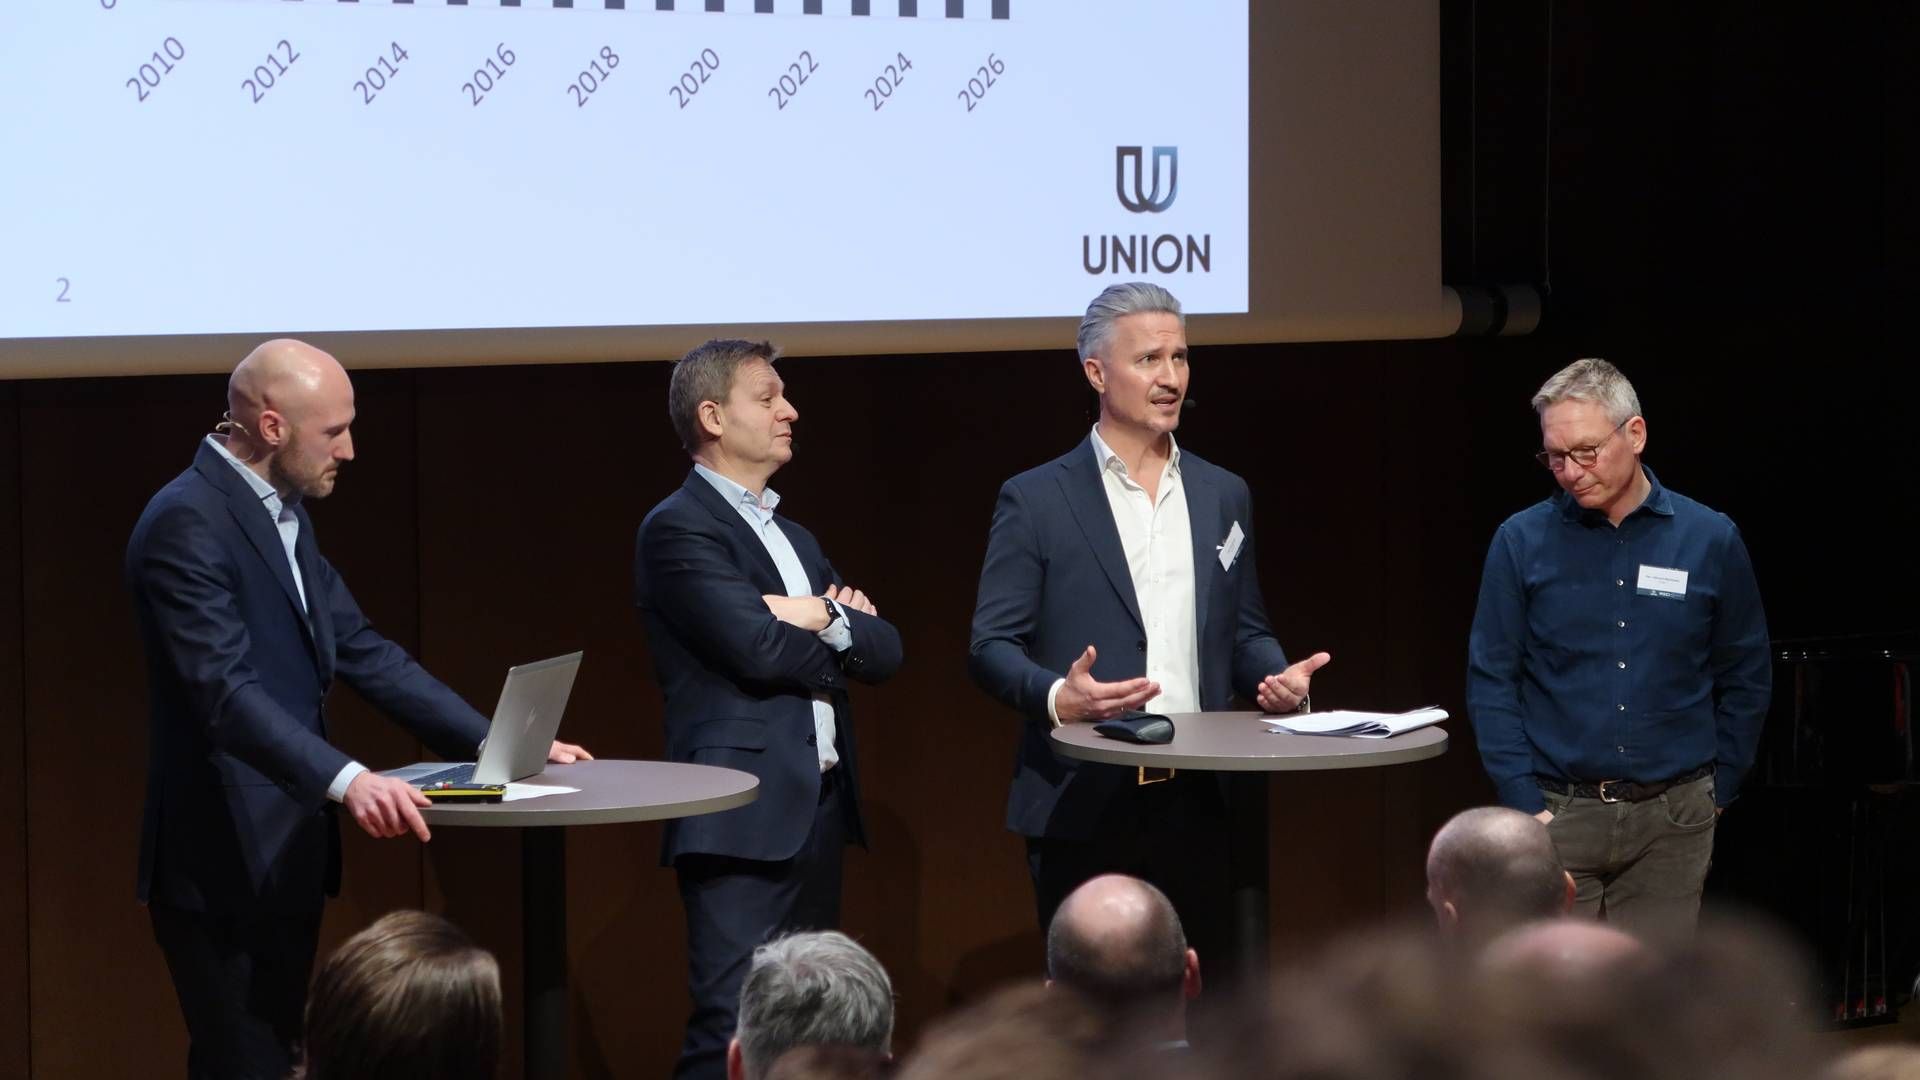 From left: Robert Nystad, head of research at UNION, Pål Ringholm, CIO of PKH, Tom Hestnes, CEO of Norselab, and Per-Håvard Martinsen of Pareto Securities, at Norwegian UNION's recent investor seminar. | Photo: Øystein Byberg